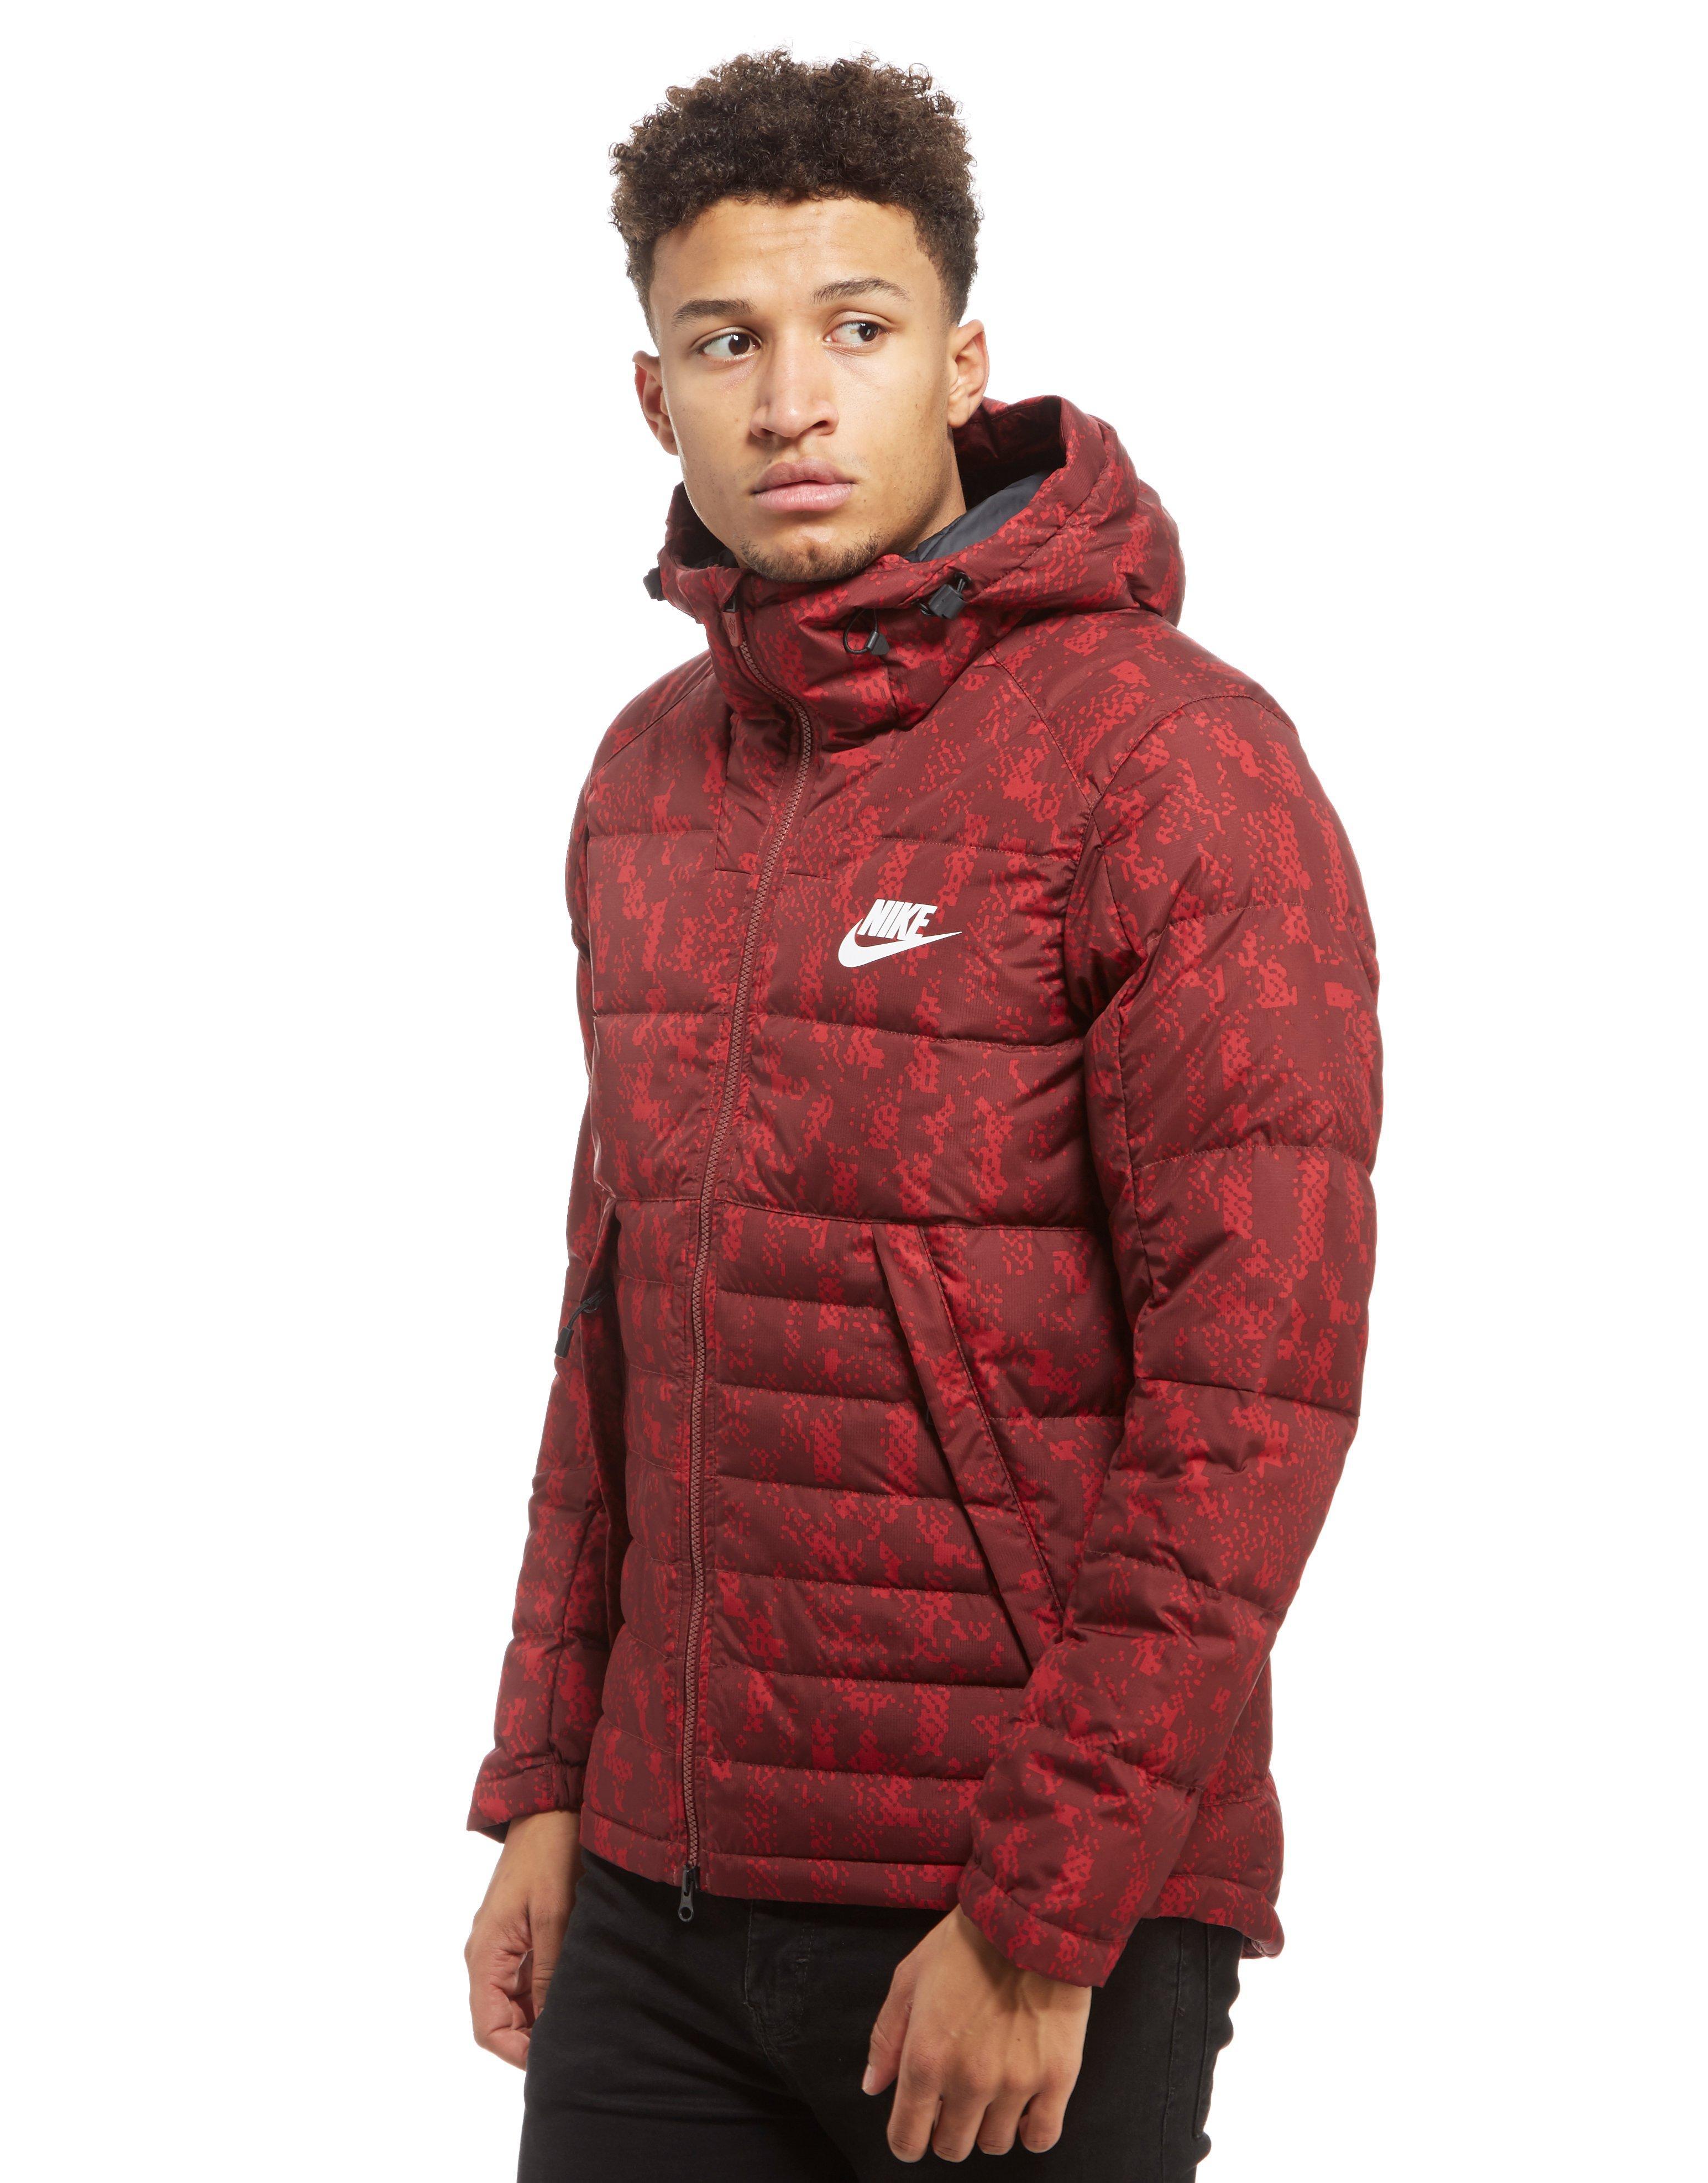 Nike Synthetic Printed Down Fill Hooded Jacket in Red for Men - Lyst